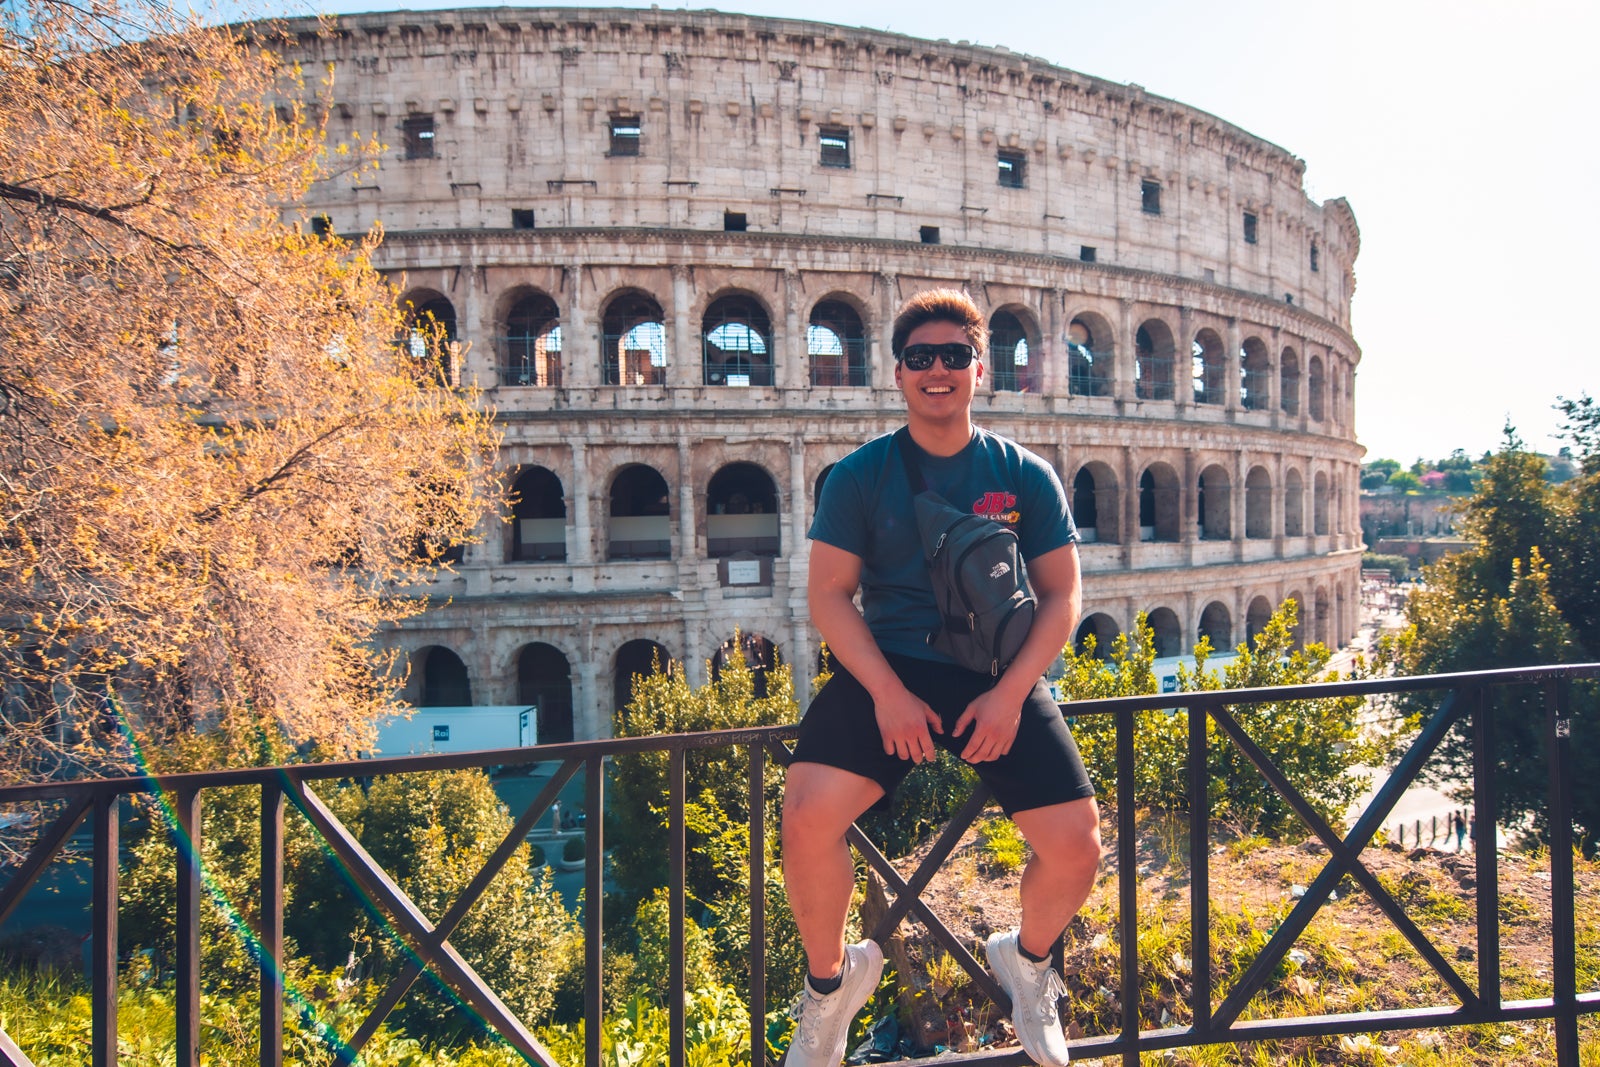 One day in Europe: How (and why) I spent 345,000 points for 36 hours in Rome wit..